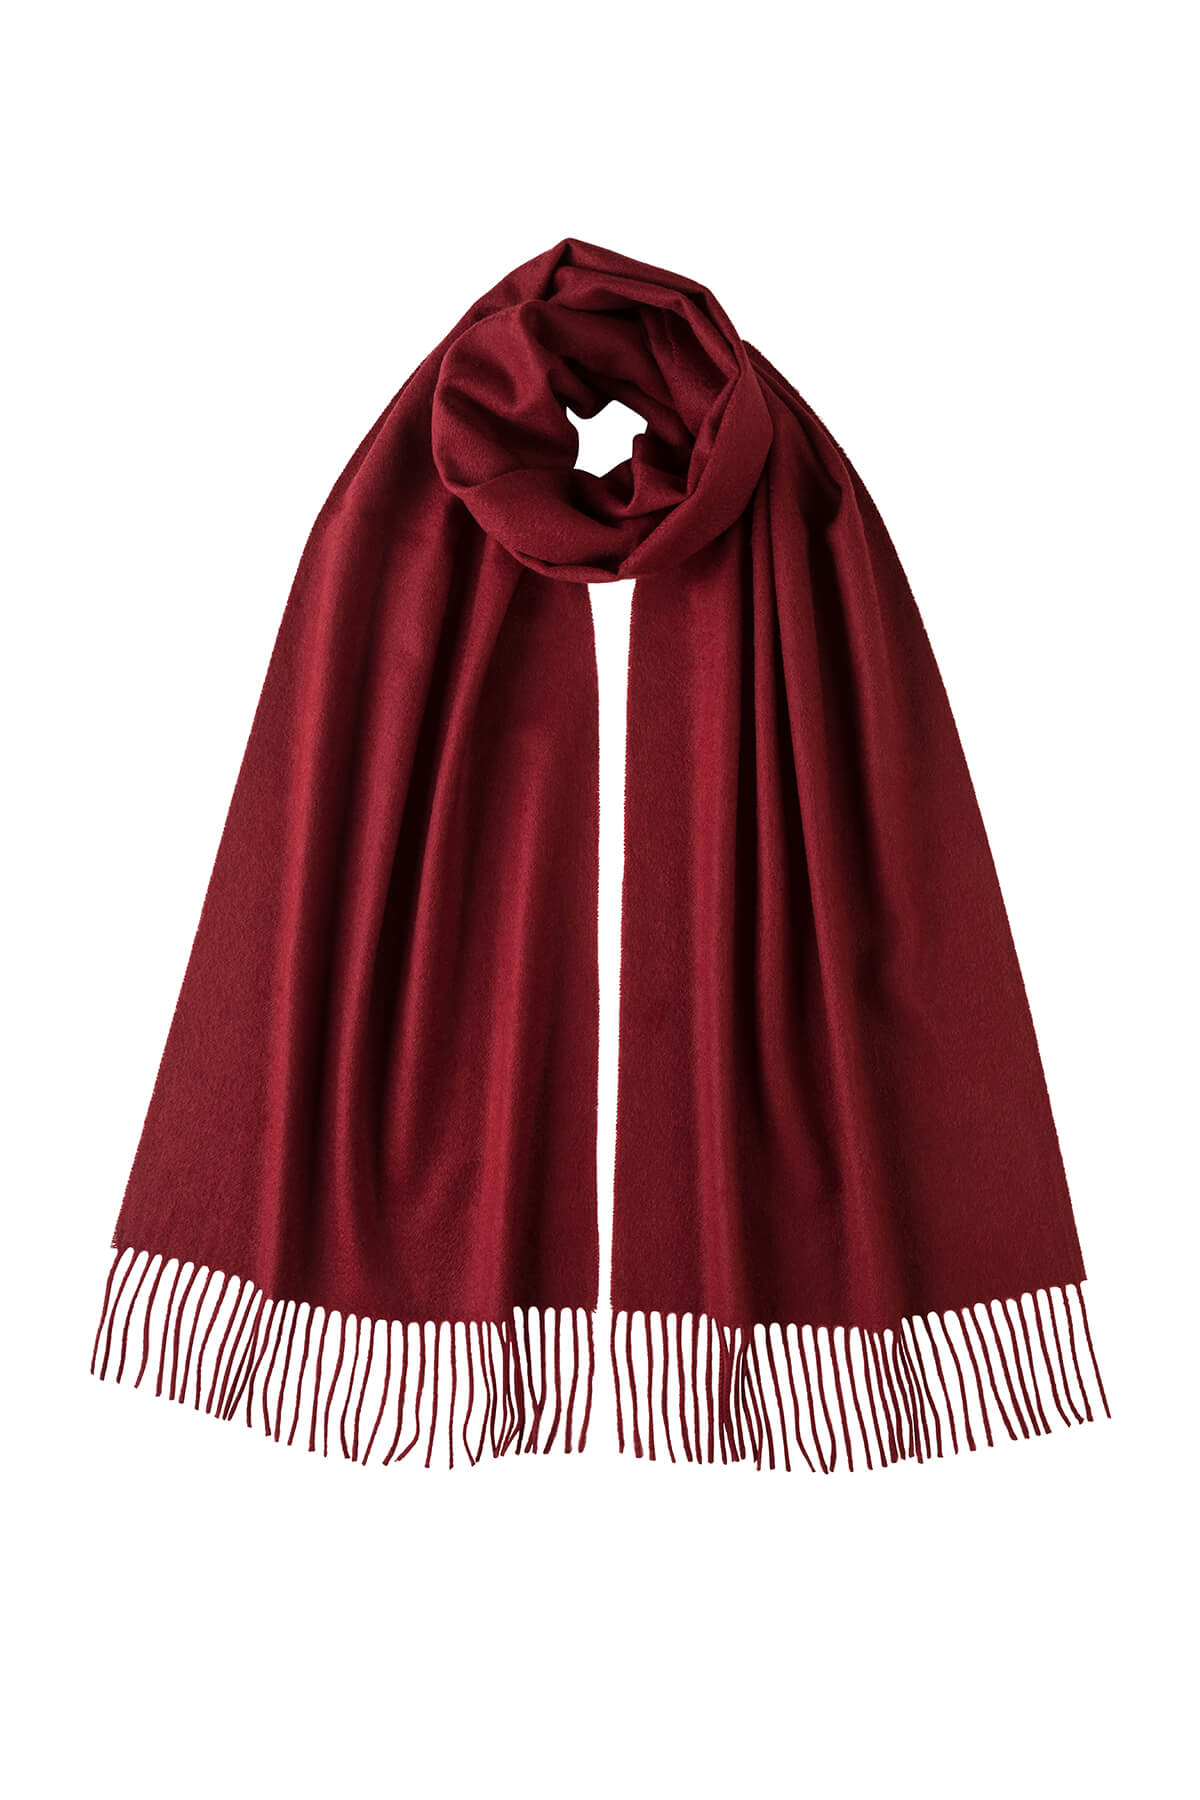 Johnstons of Elgin Oversized Cashmere Scarf in Merlot on a white background WA000057SE7234N/A